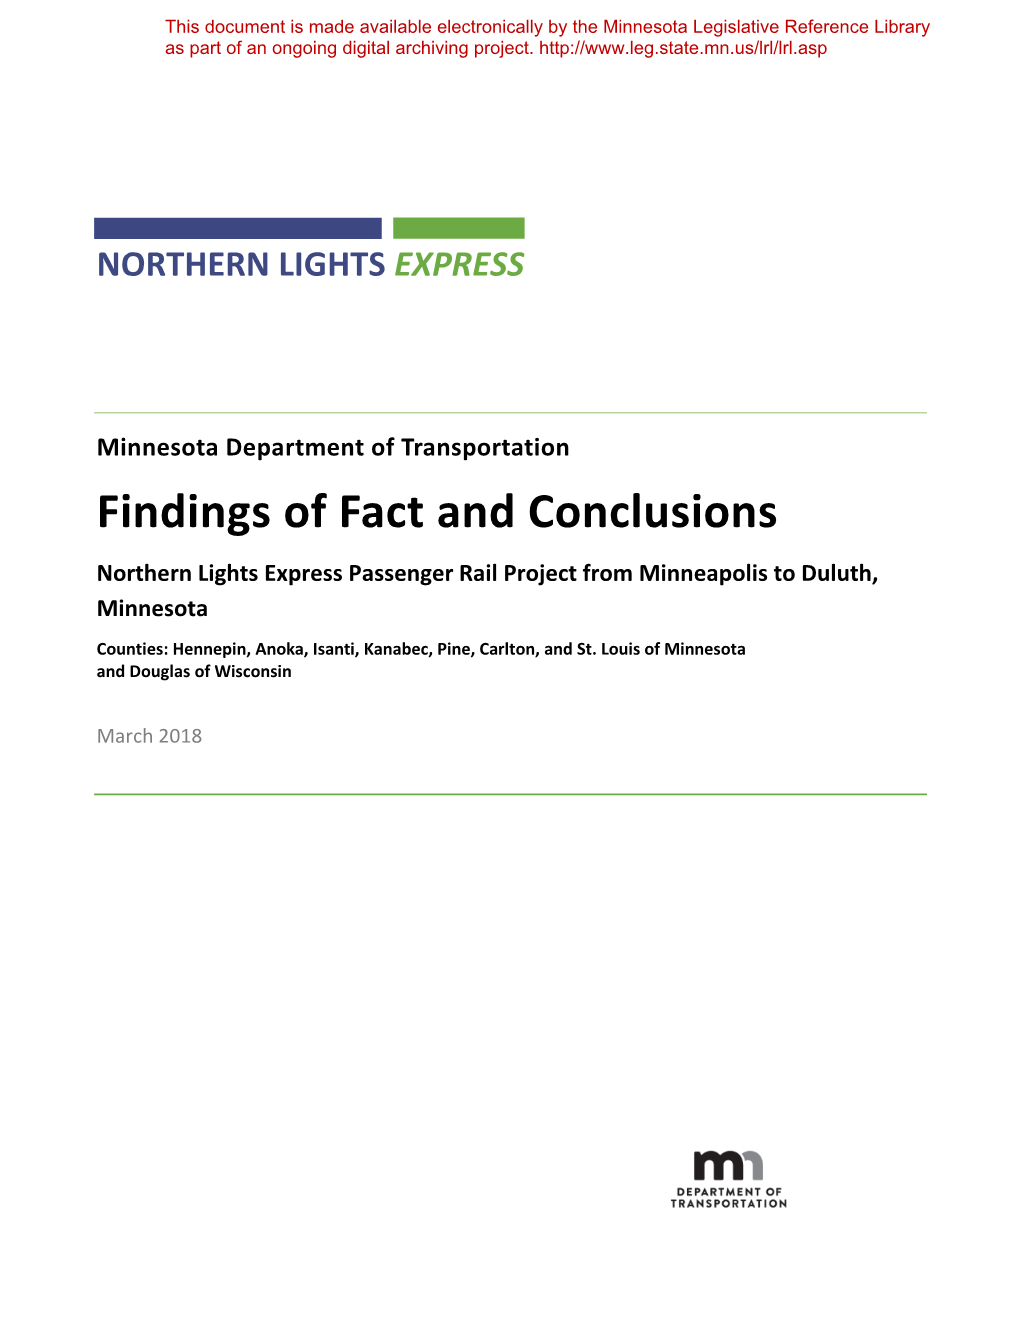 Findings of Fact and Conclusions